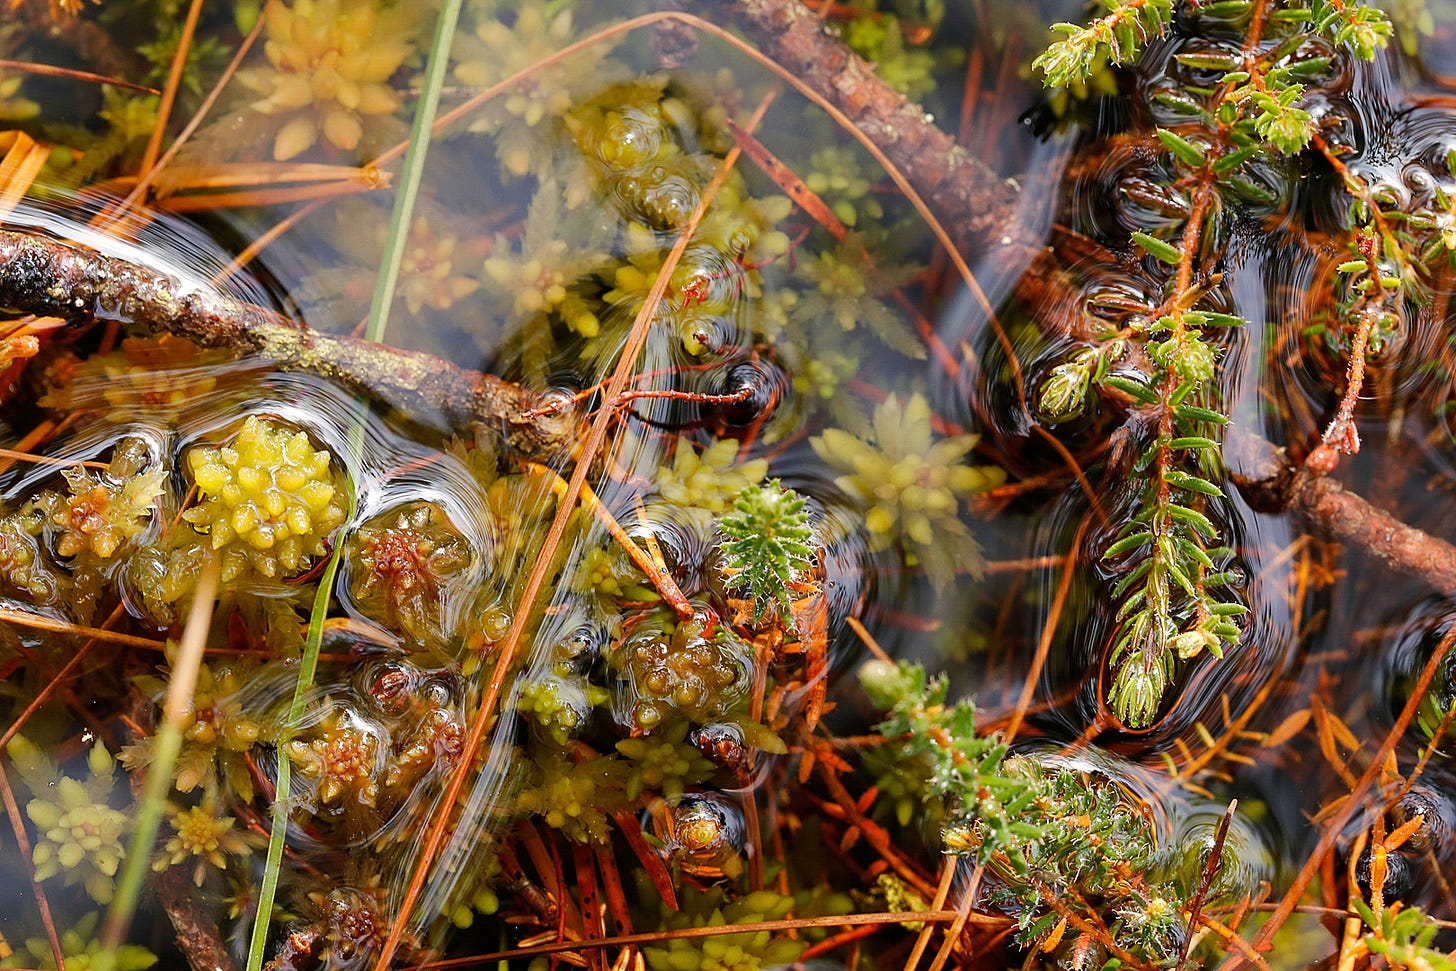 Sphagnum mosses, leaves and fallen branches in a lowland raised bog